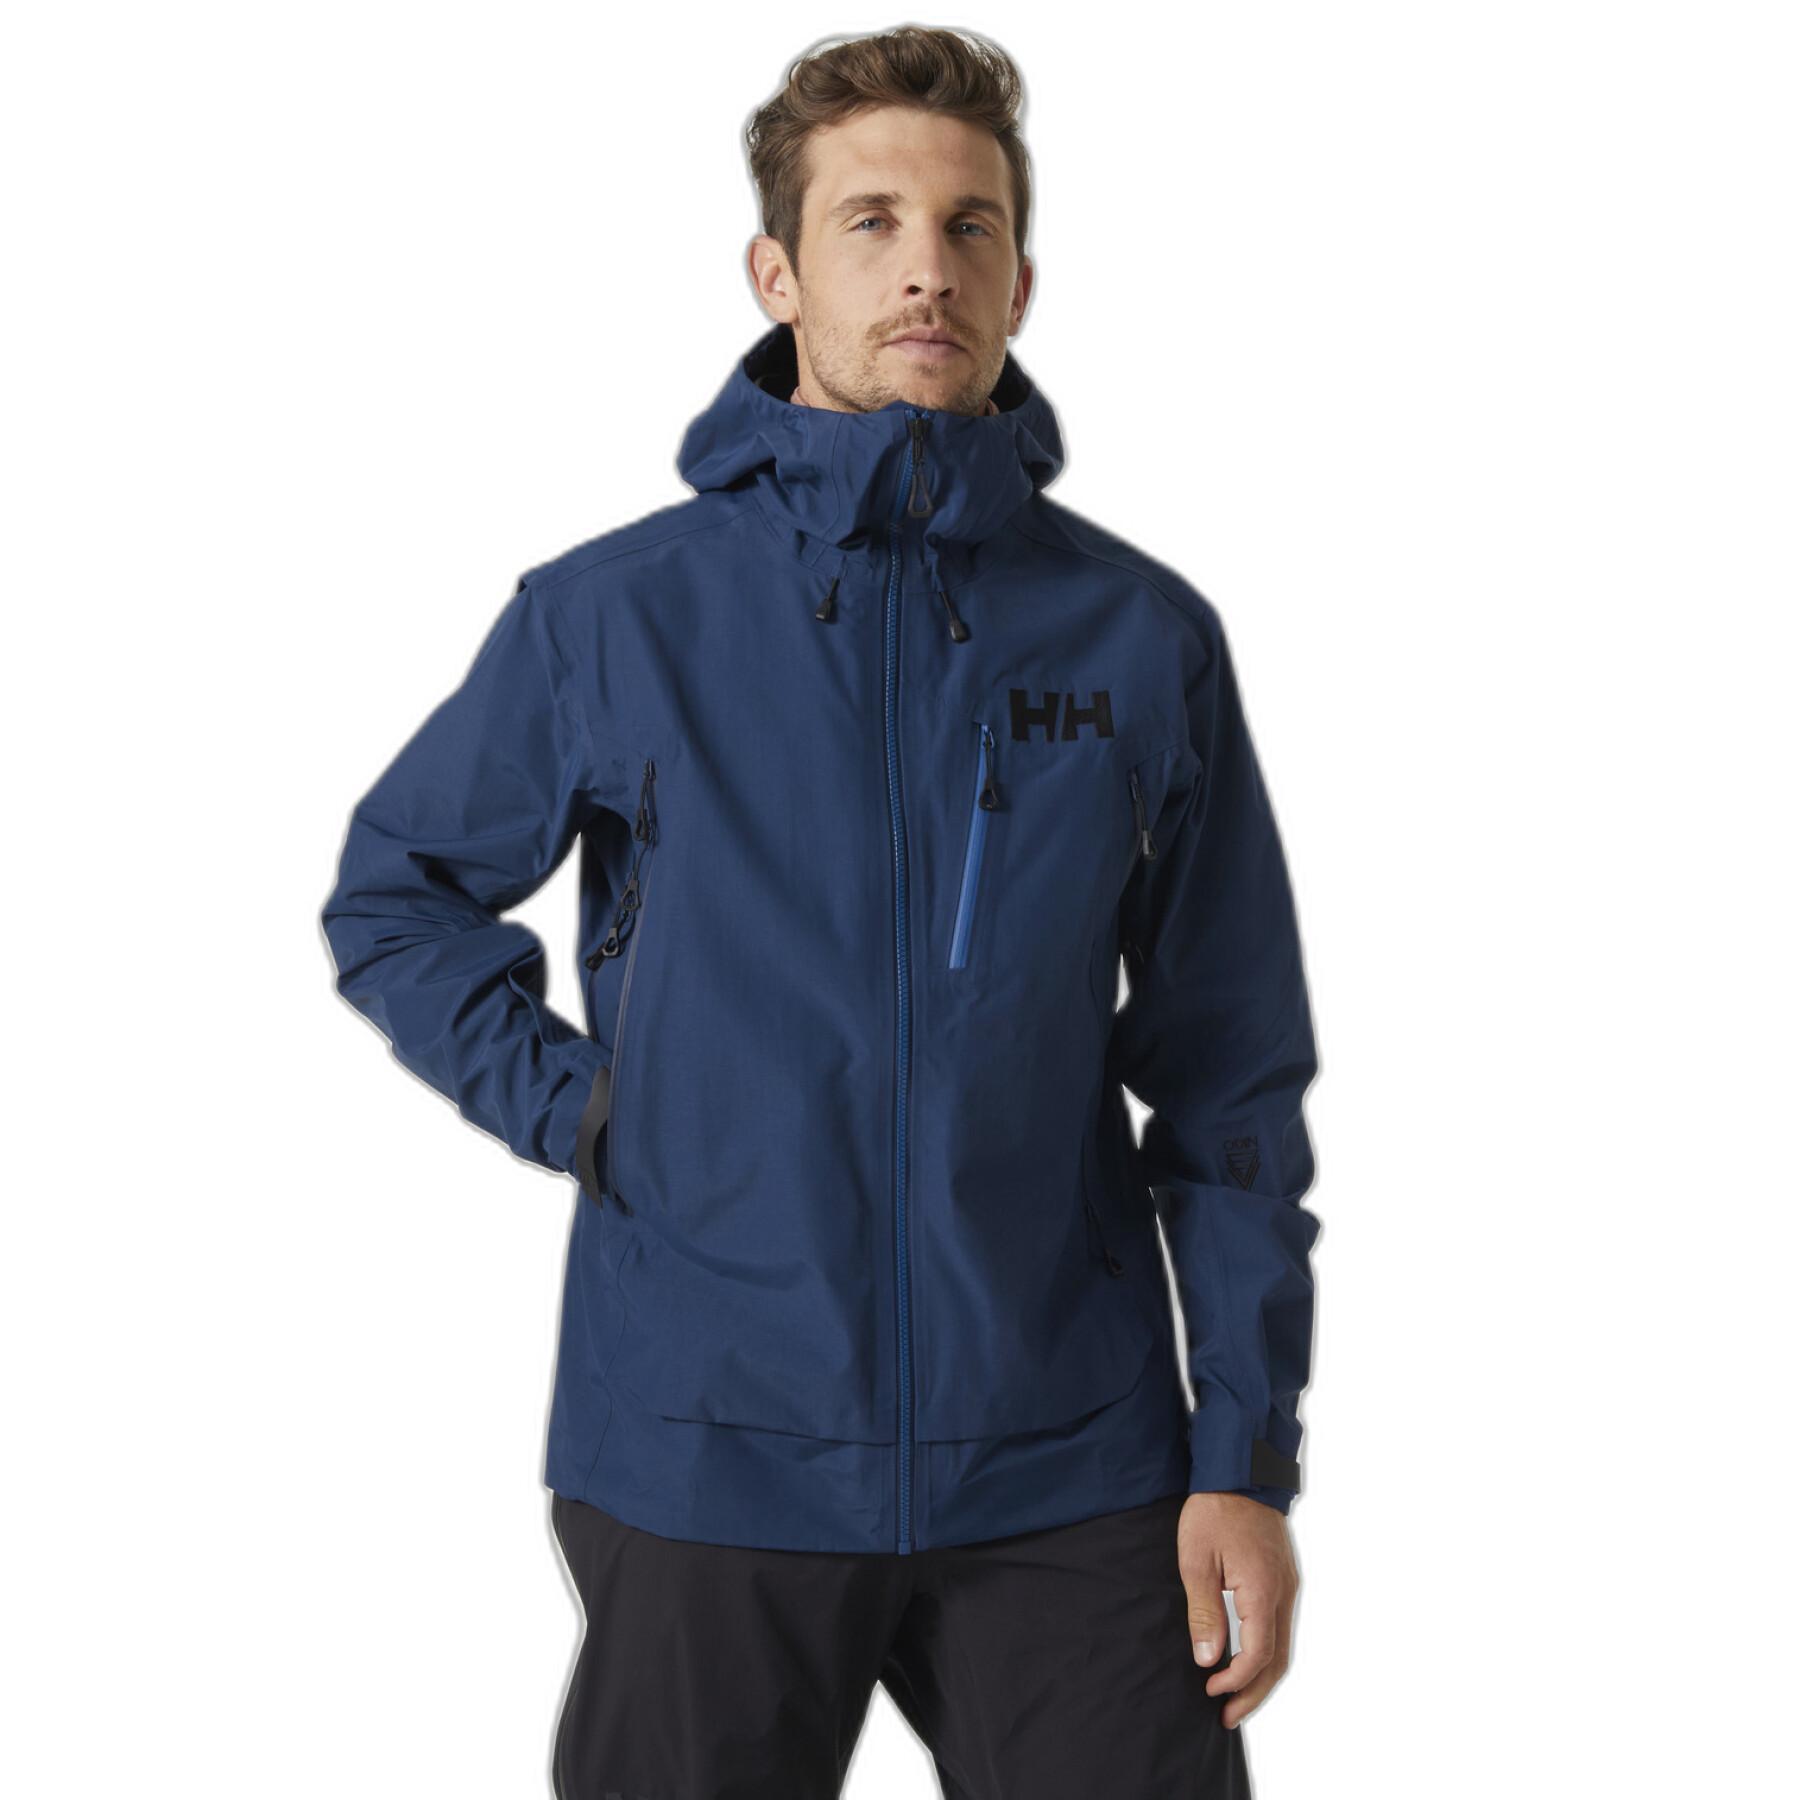 Giacca impermeabile Helly Hansen Odin 9 Worlds 3.0